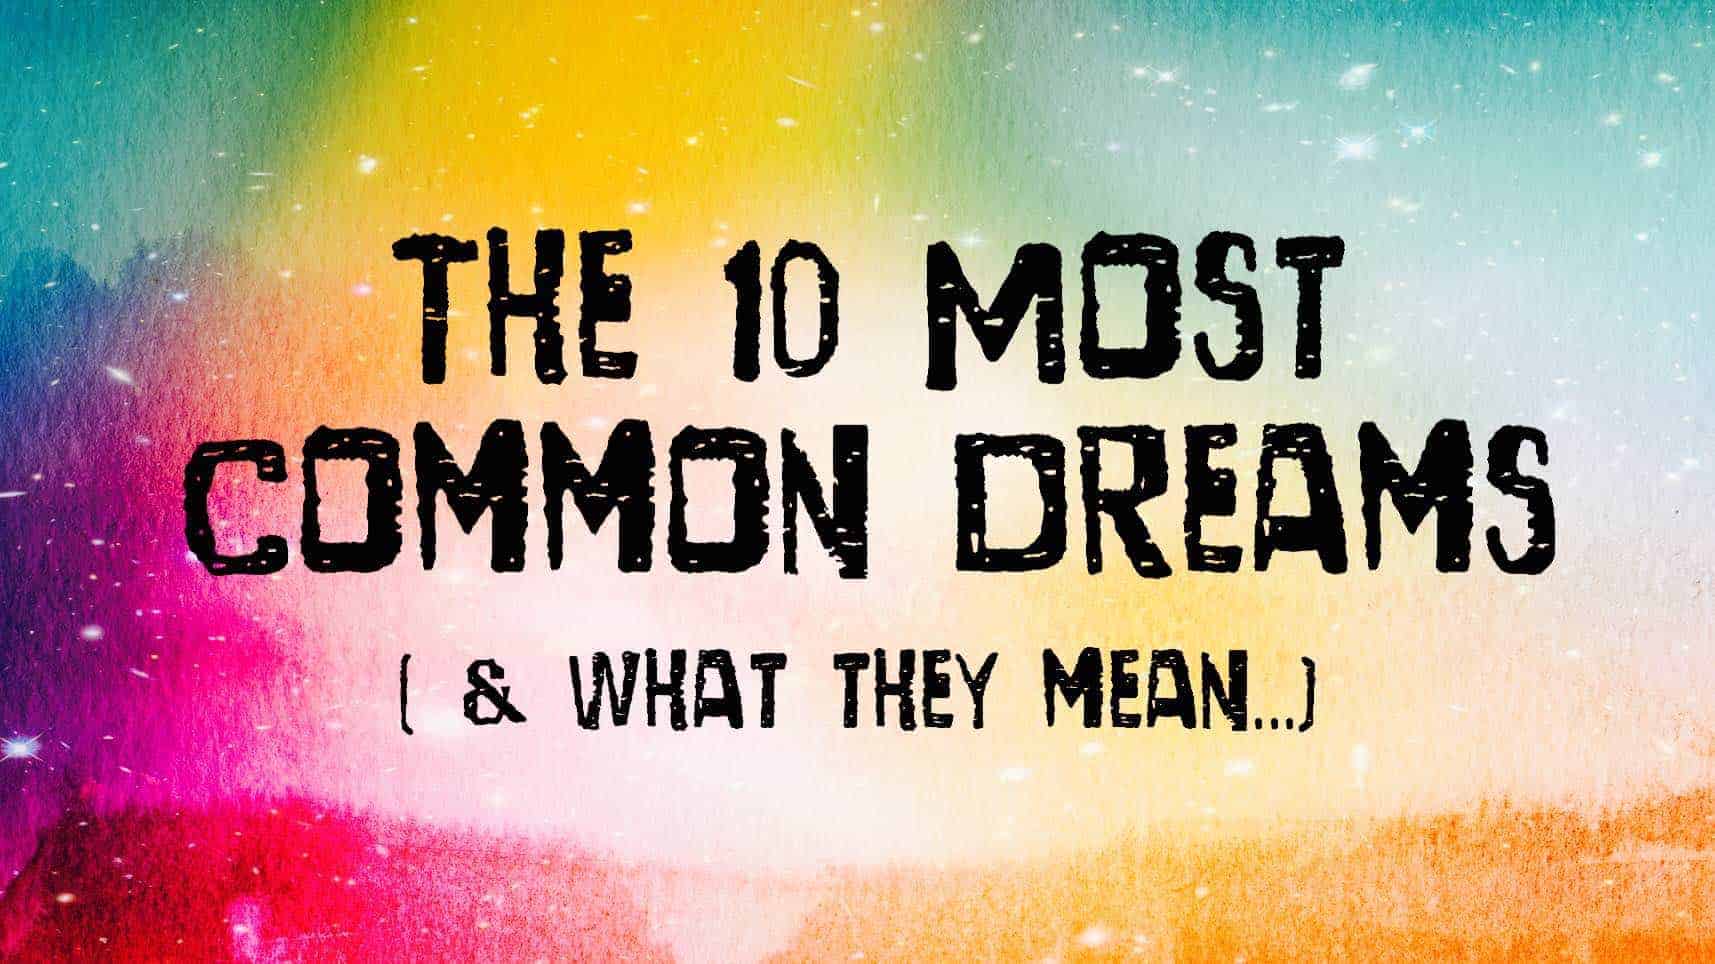 11 Common Themes In Dreams And What They Mean